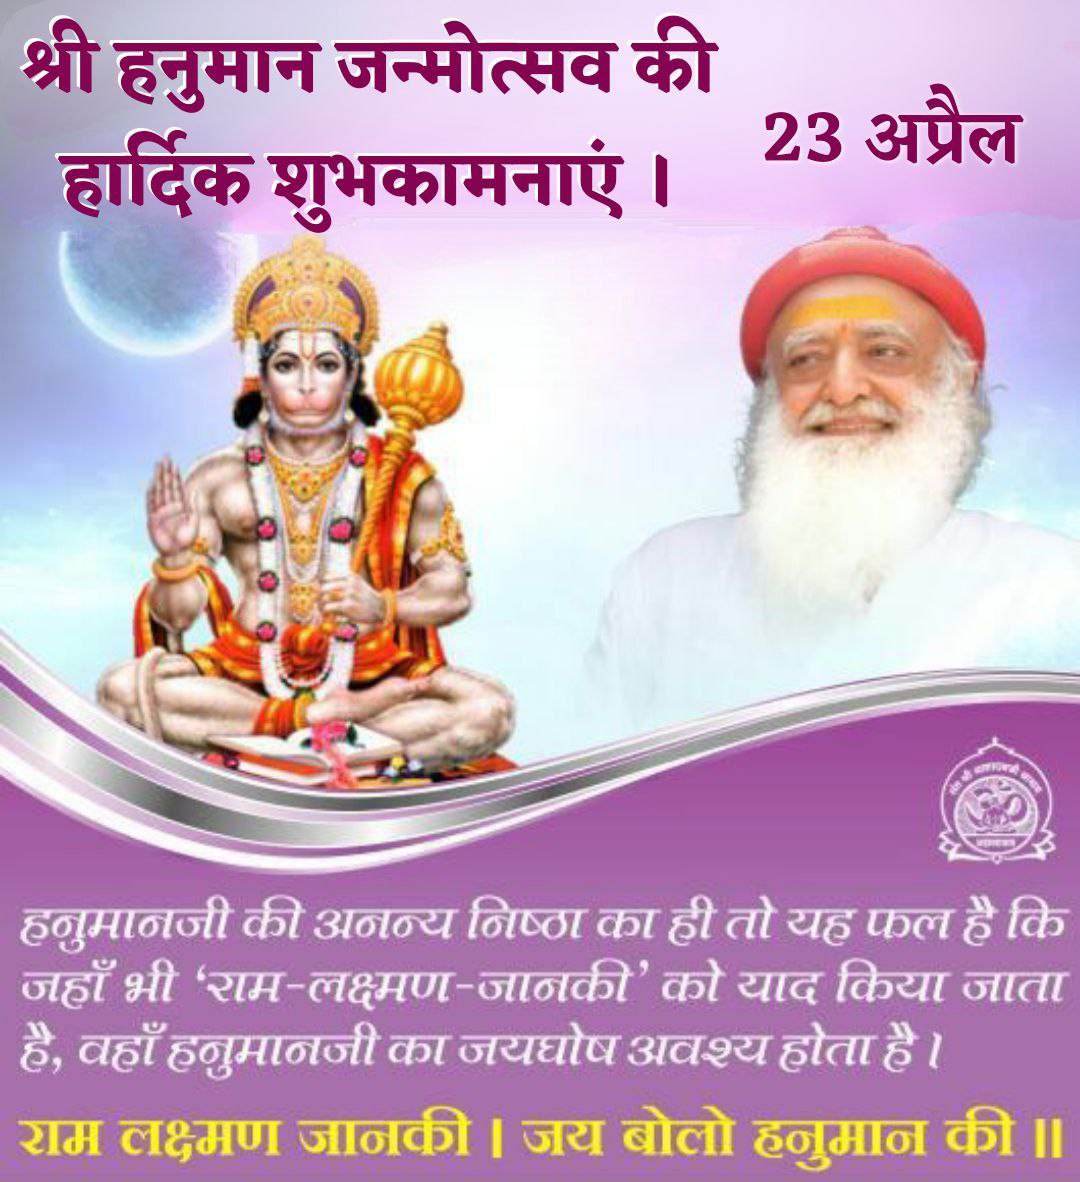 Sant Shri Asharamji Bapu 
Chaitra Poornima
#हनुमान_जन्मोत्सव ,Mahabali Hanuman, despite being the master of all accomplishments, remained dedicated to knowledge and took incarnation to complete the work of Ramji and remained a devoted devotee.